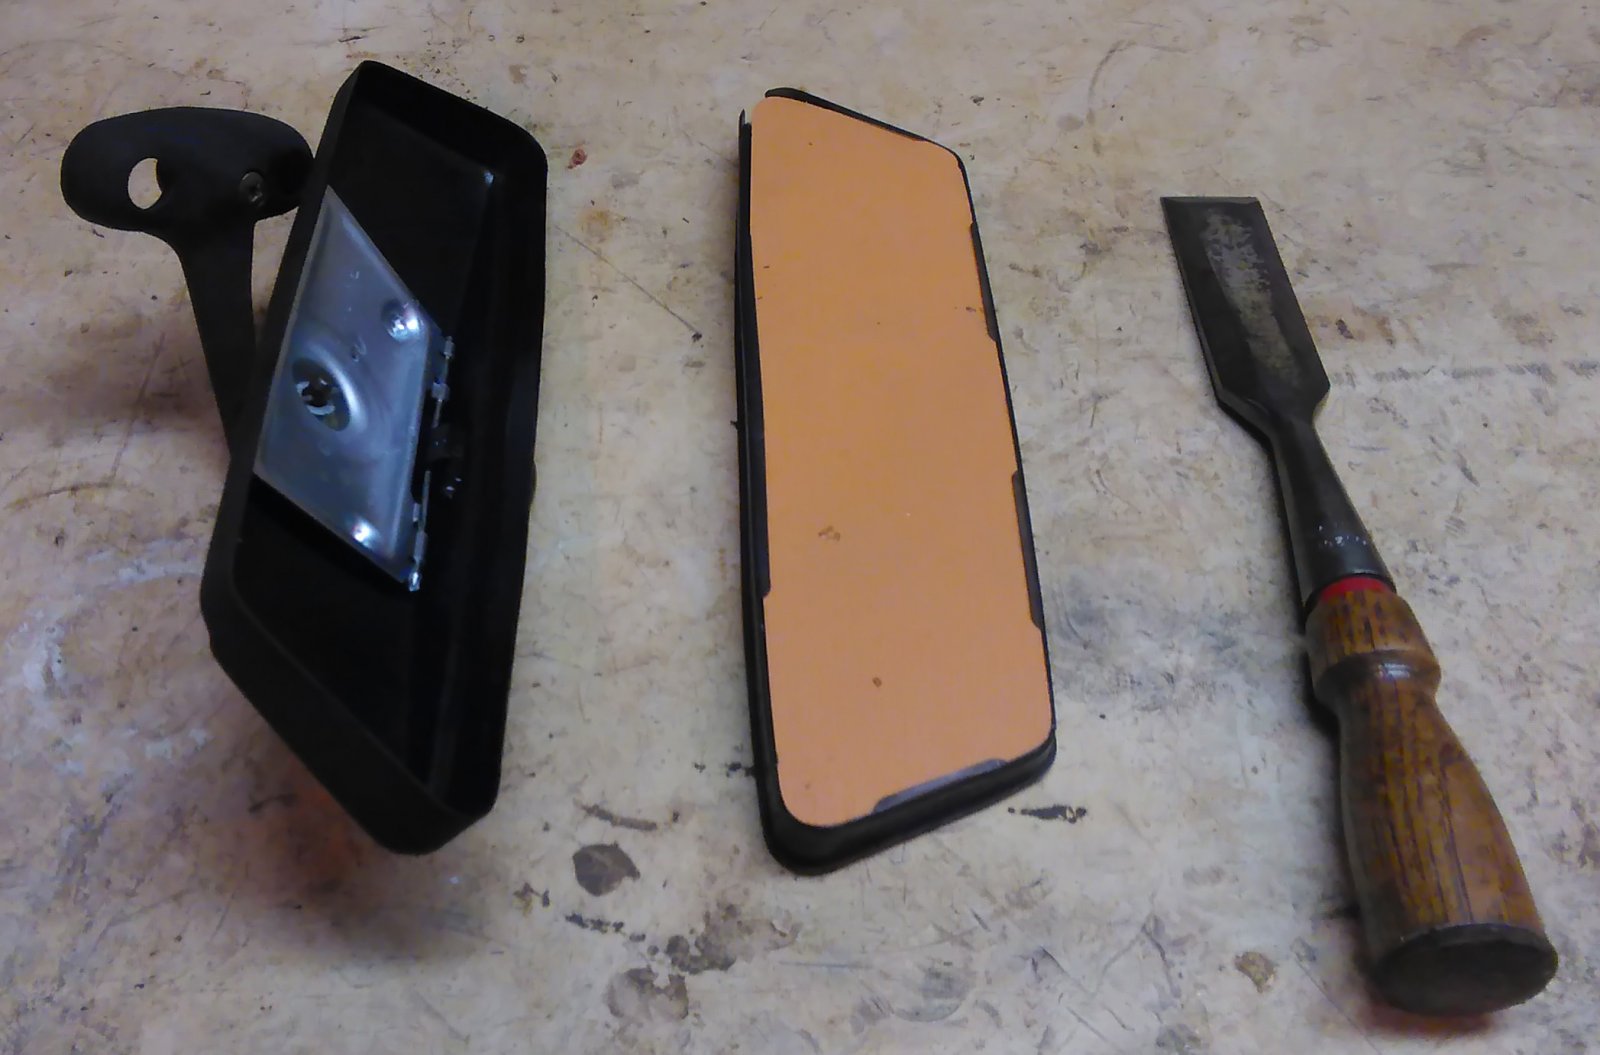 X19 Rear View Mirror Case Opened with Wood Chisel.jpg